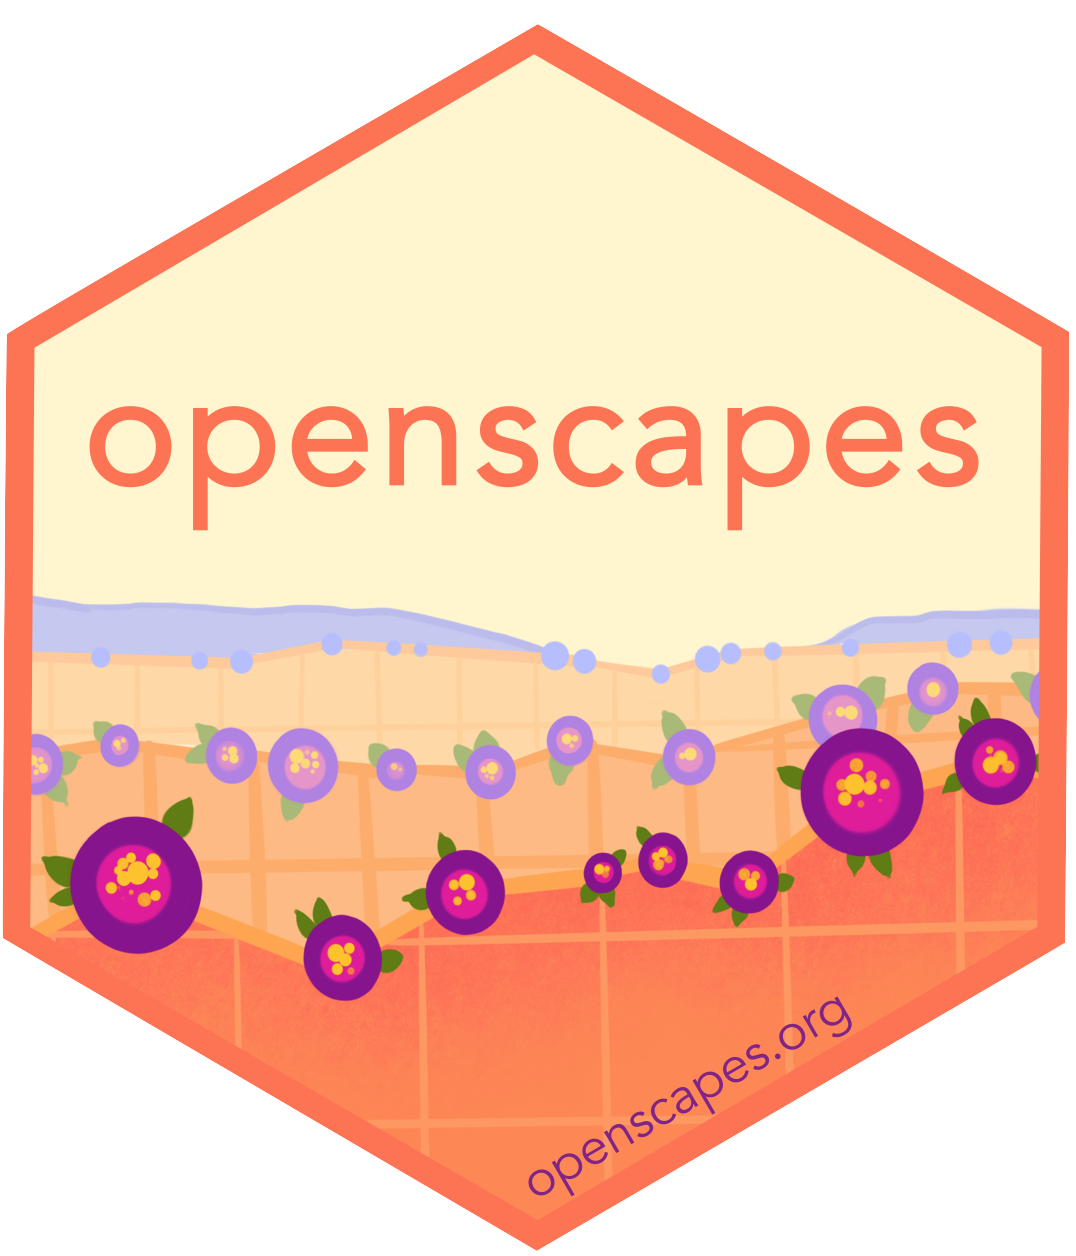 Openscapes